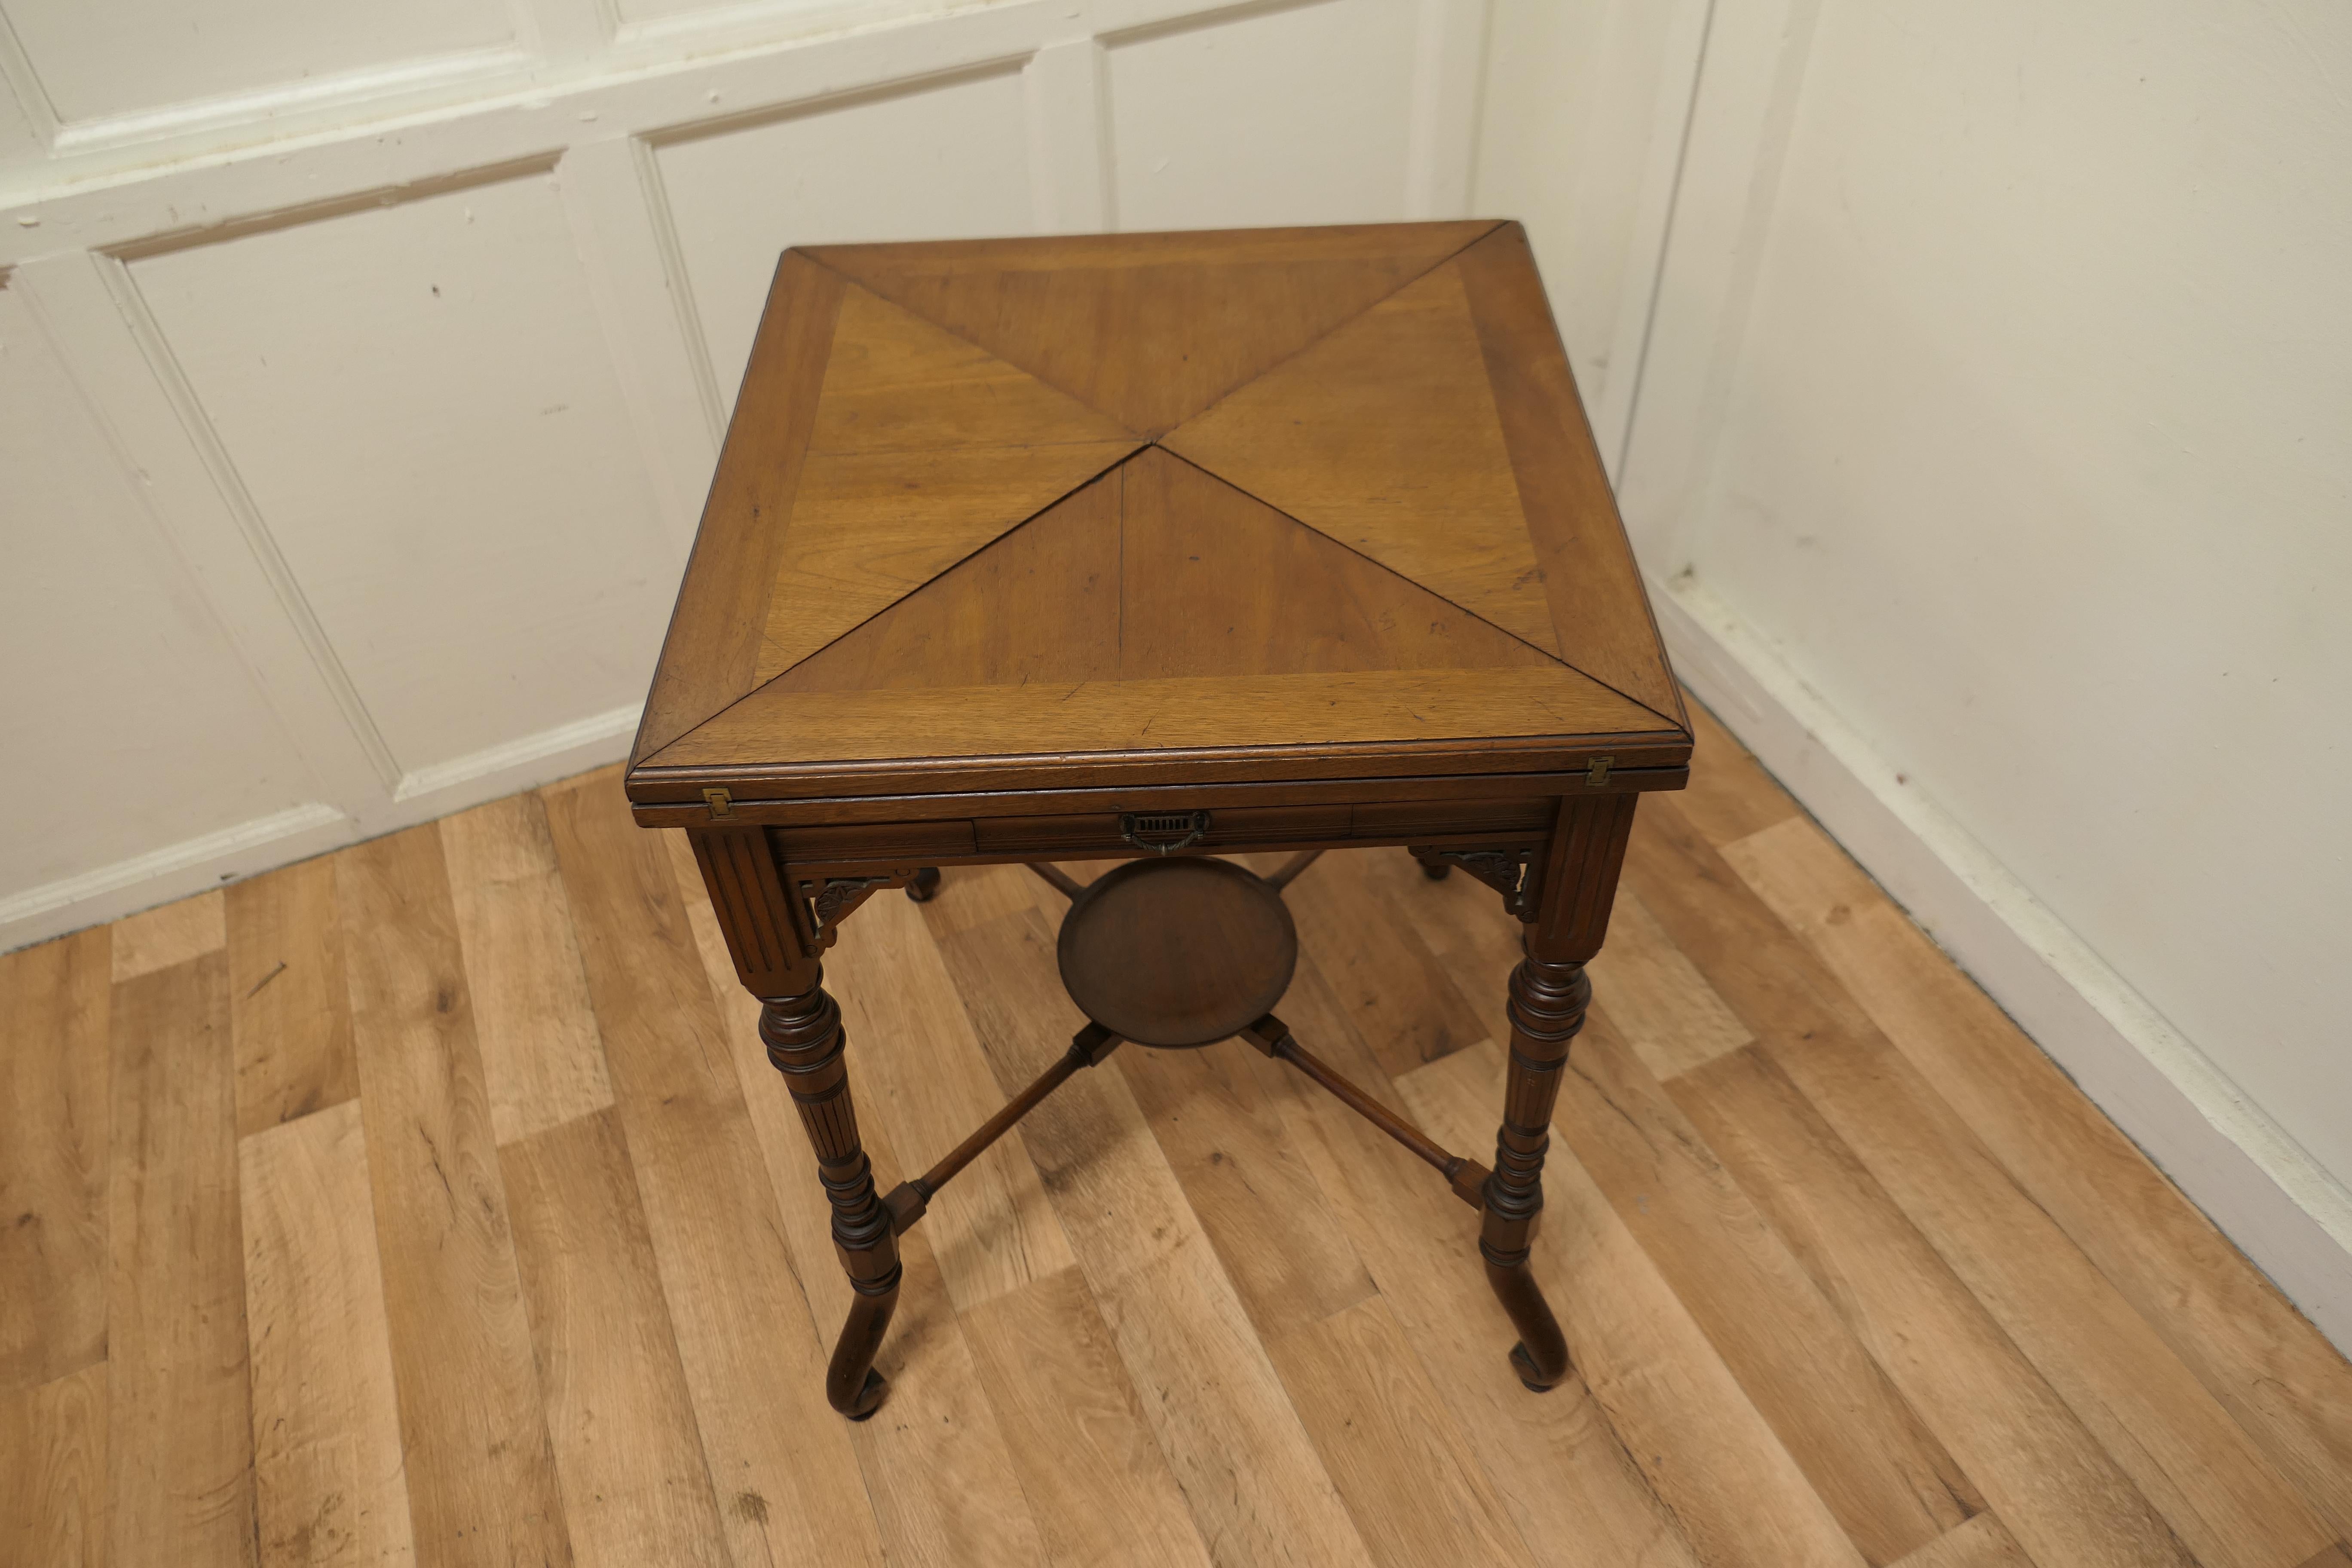 Victorian envelope card table with gaming wells

A beautifully designed piece, the sturdy 4 footed leg supports the 4 triangular hinged leaves which swivel and by pressing a button underneath they open out to reveal a good size card table with